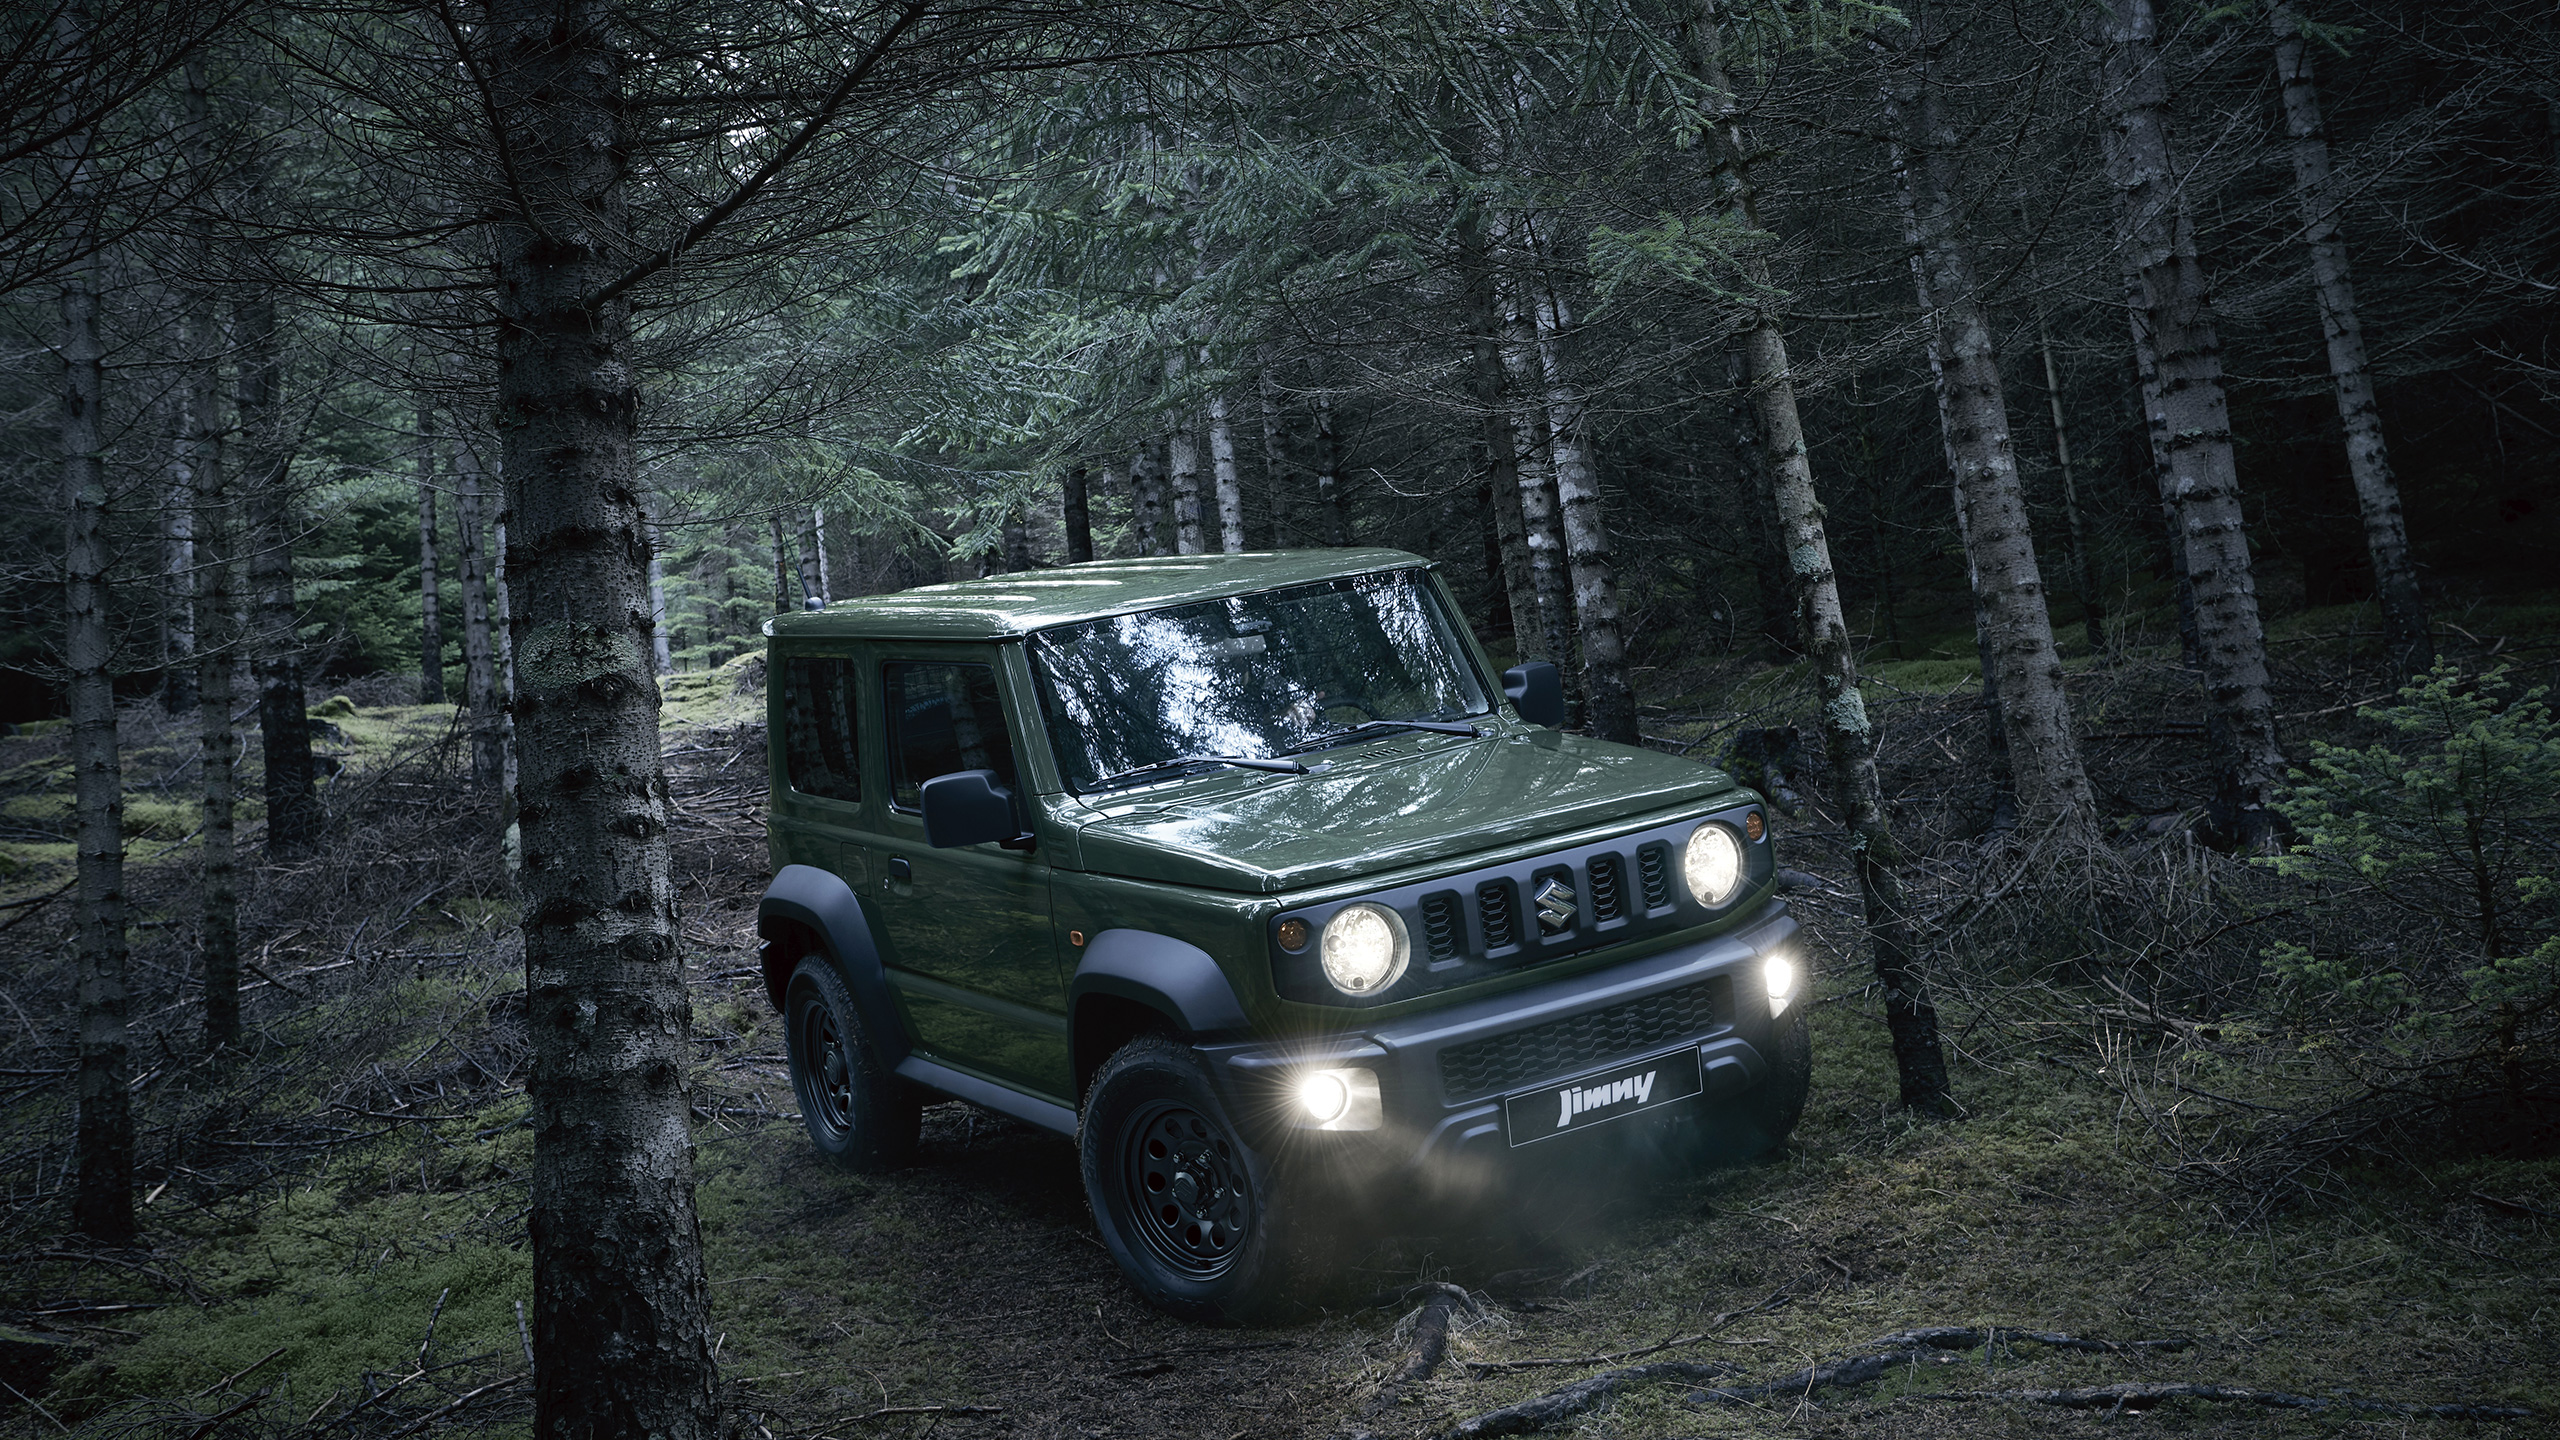 Jimny-driving-through-the-forest